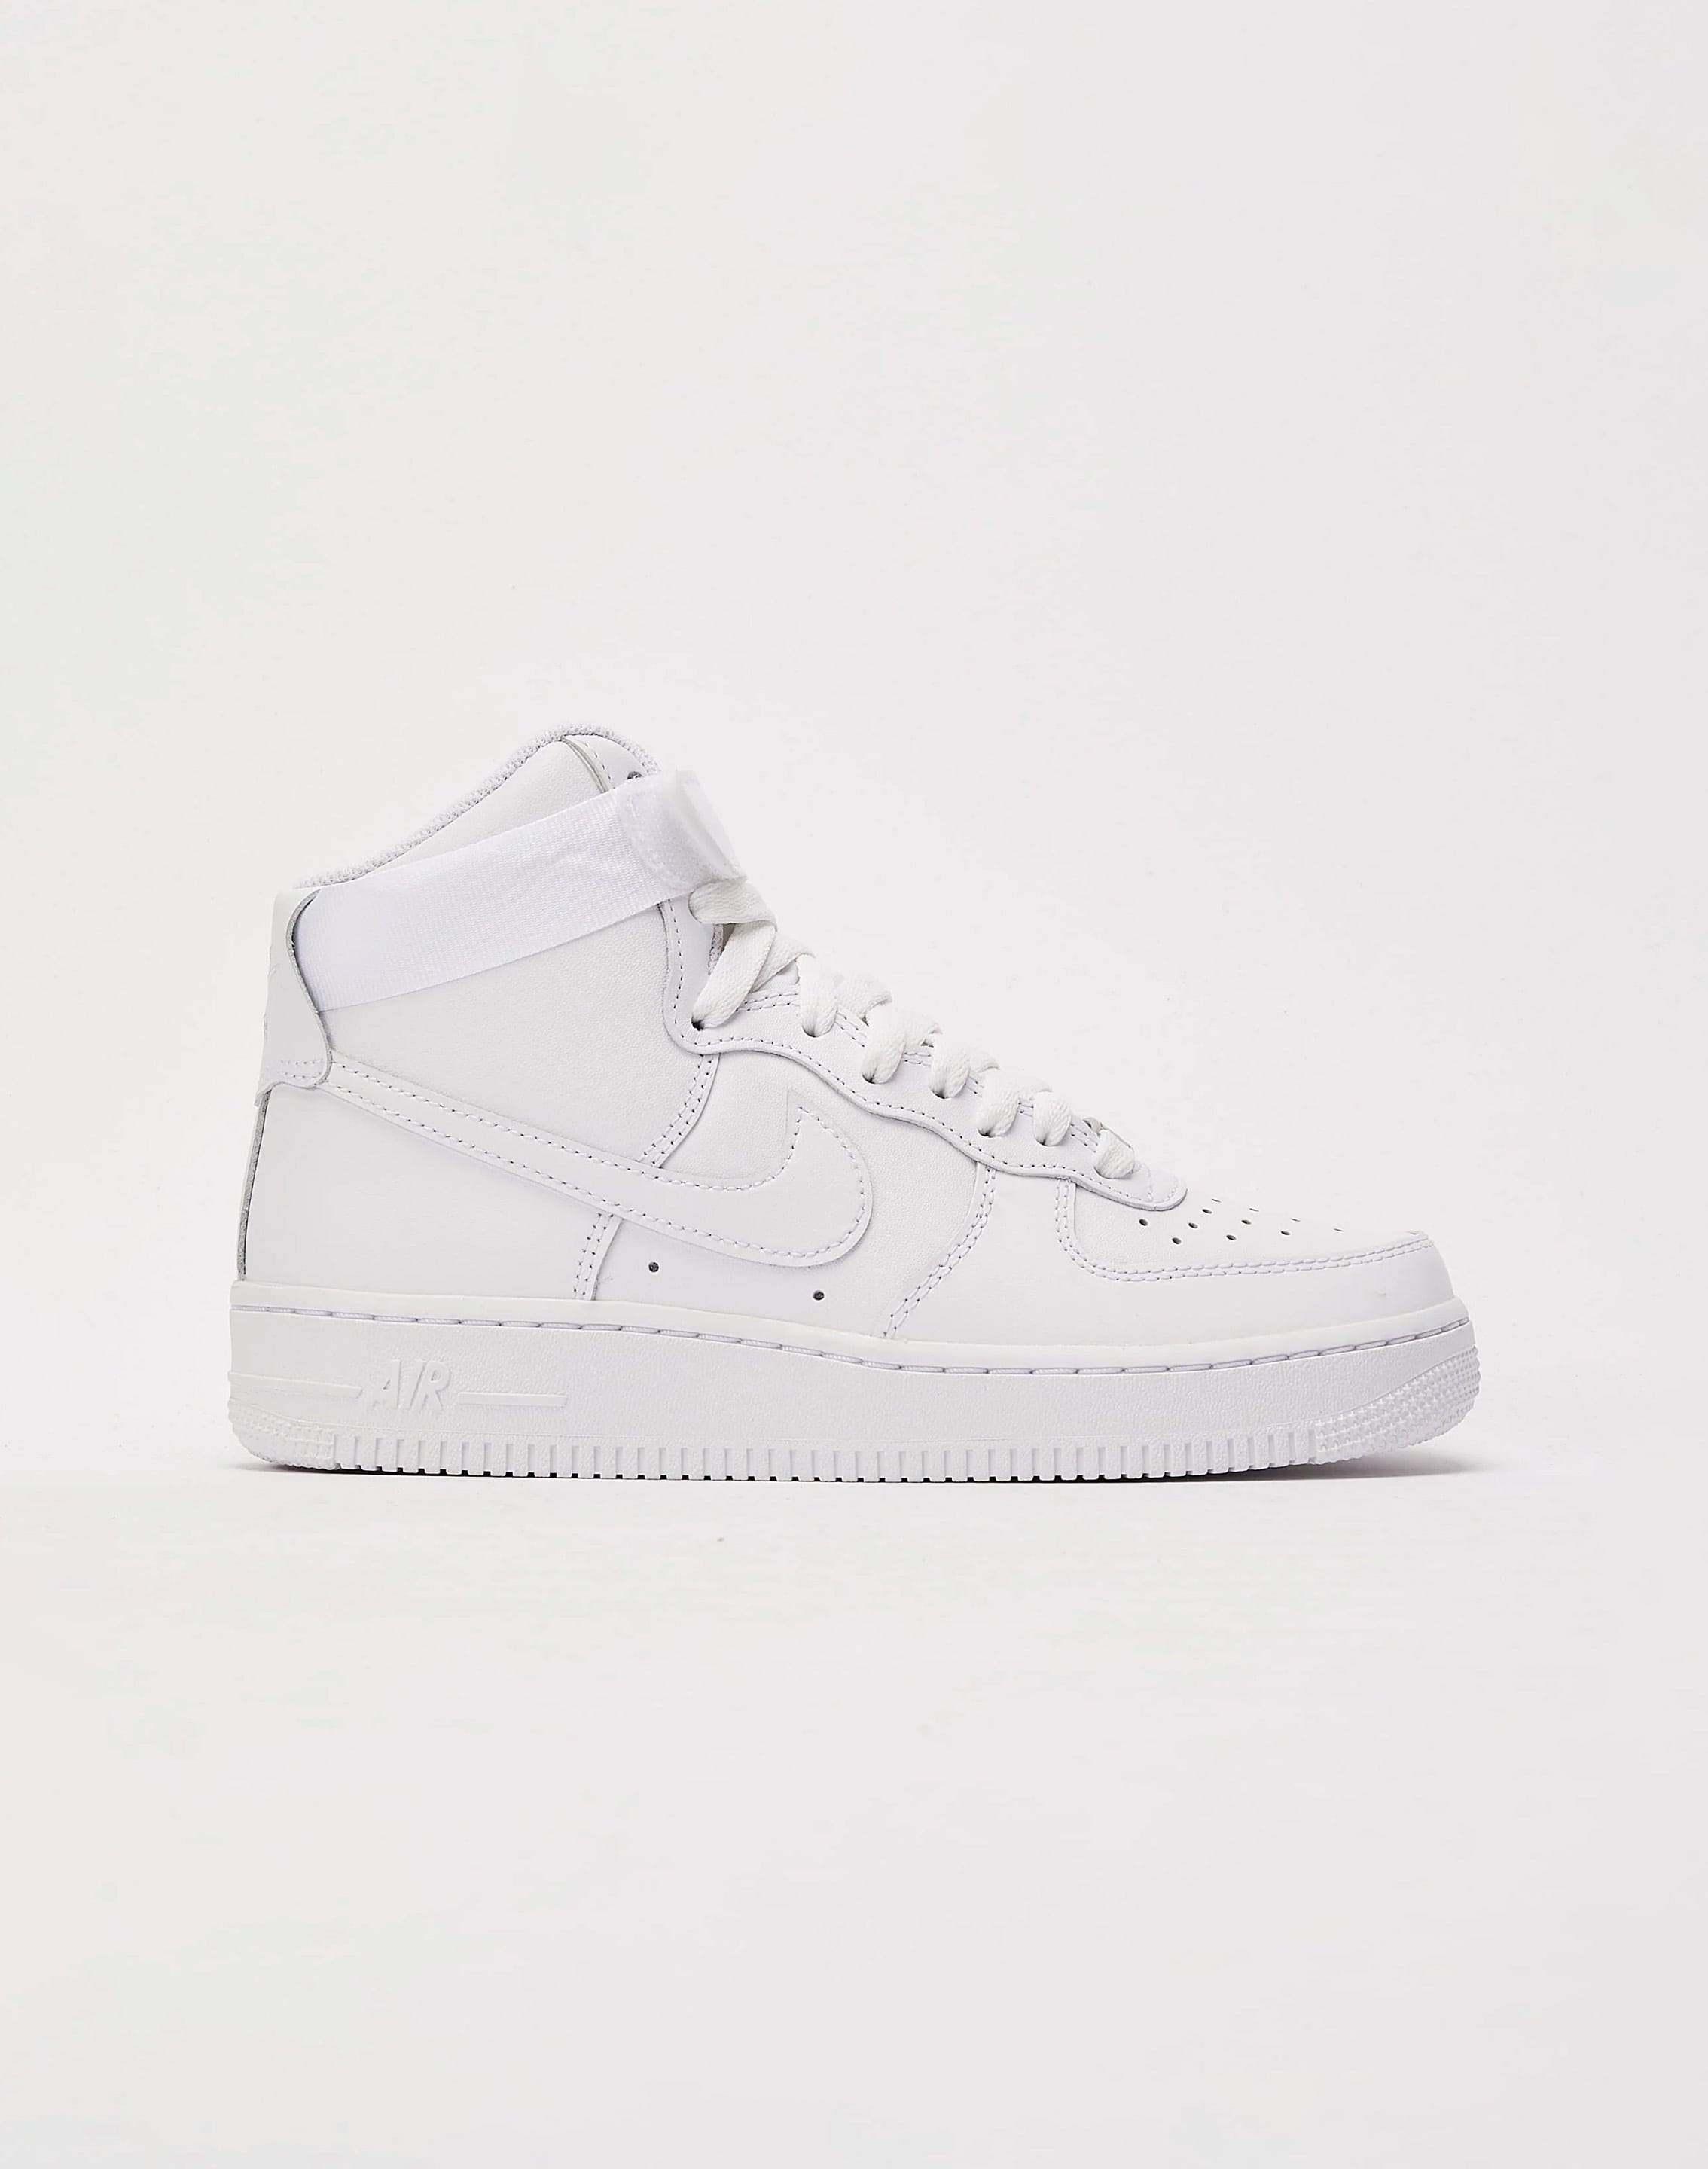 white air force ones in stock near me